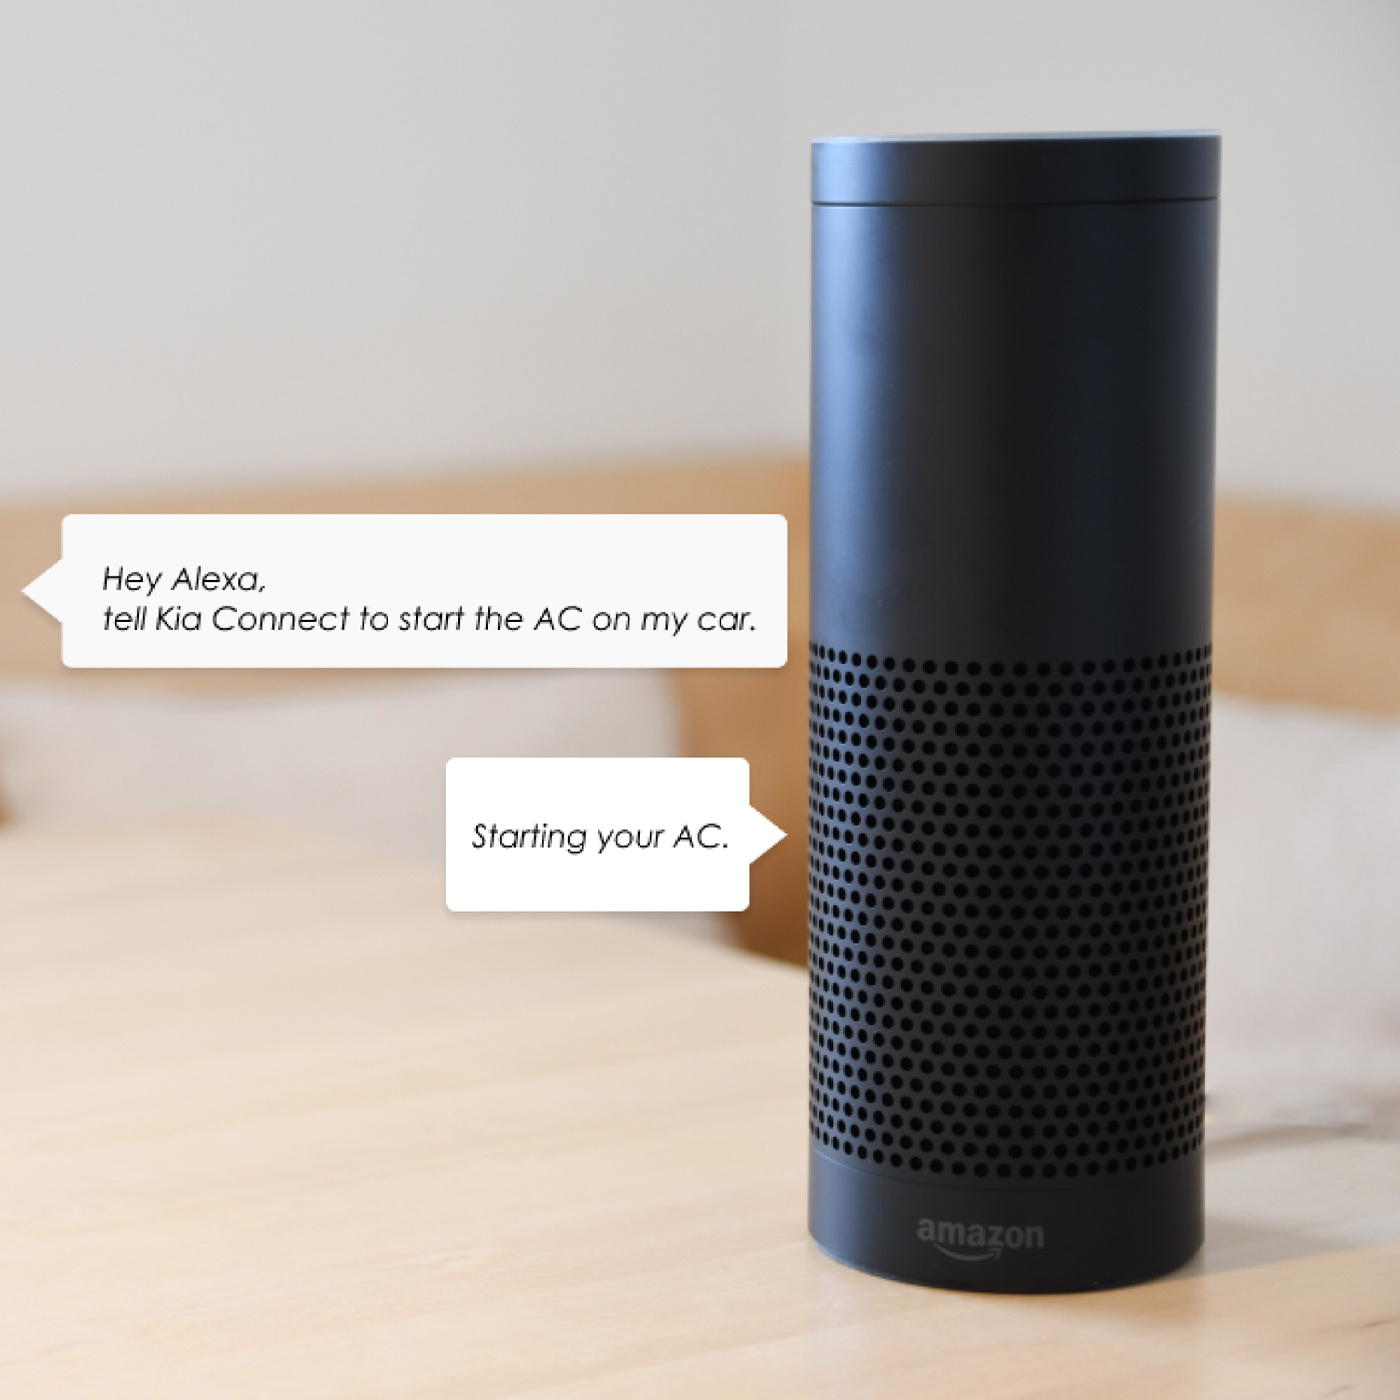 A black Amazon Alexa on a table responding to a command to start the AC in the car with Kia Connect